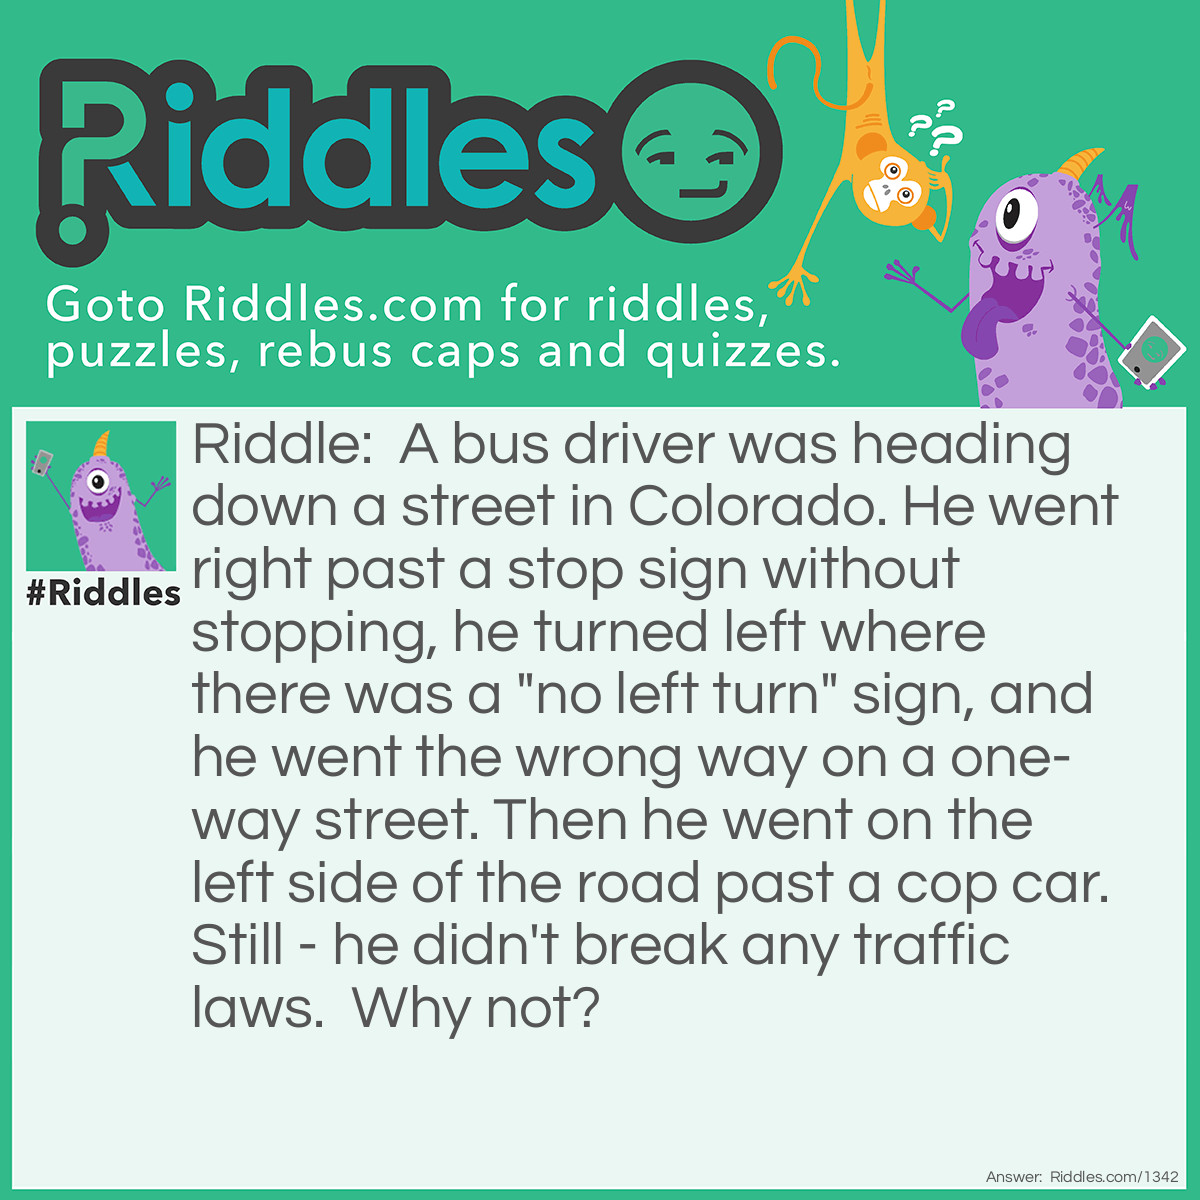 Riddle: A bus driver was heading down a street in Colorado. He went right past a stop sign without stopping, he turned left where there was a "no left turn" sign, and he went the wrong way on a one-way street. Then he went on the left side of the road past a cop car. Still - he didn't break any traffic laws. Why not? Answer: He was walking...not driving.